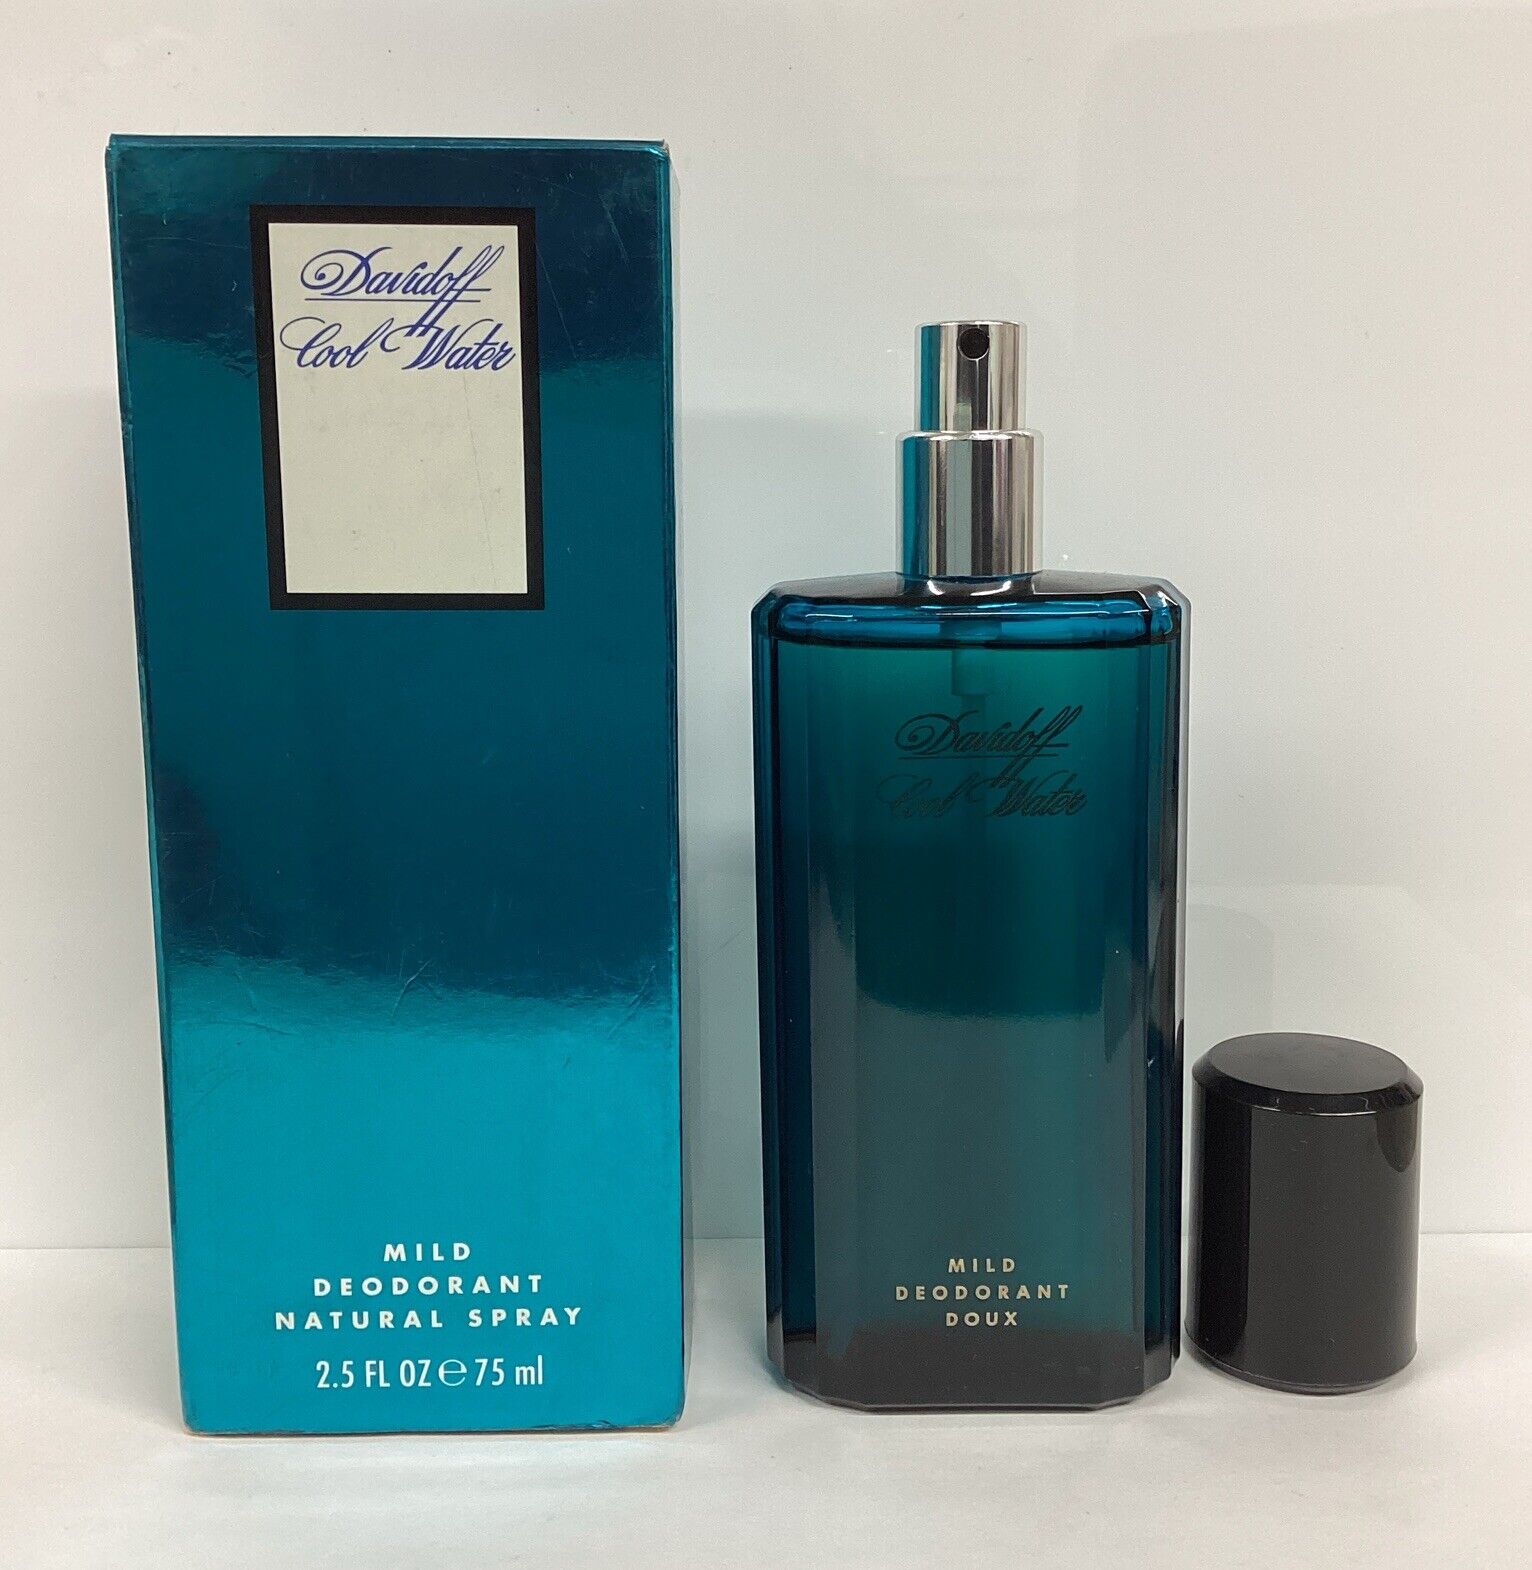 Davidoff Cool Water Deodorant 2.5oz (Glass) Spray As Pictured